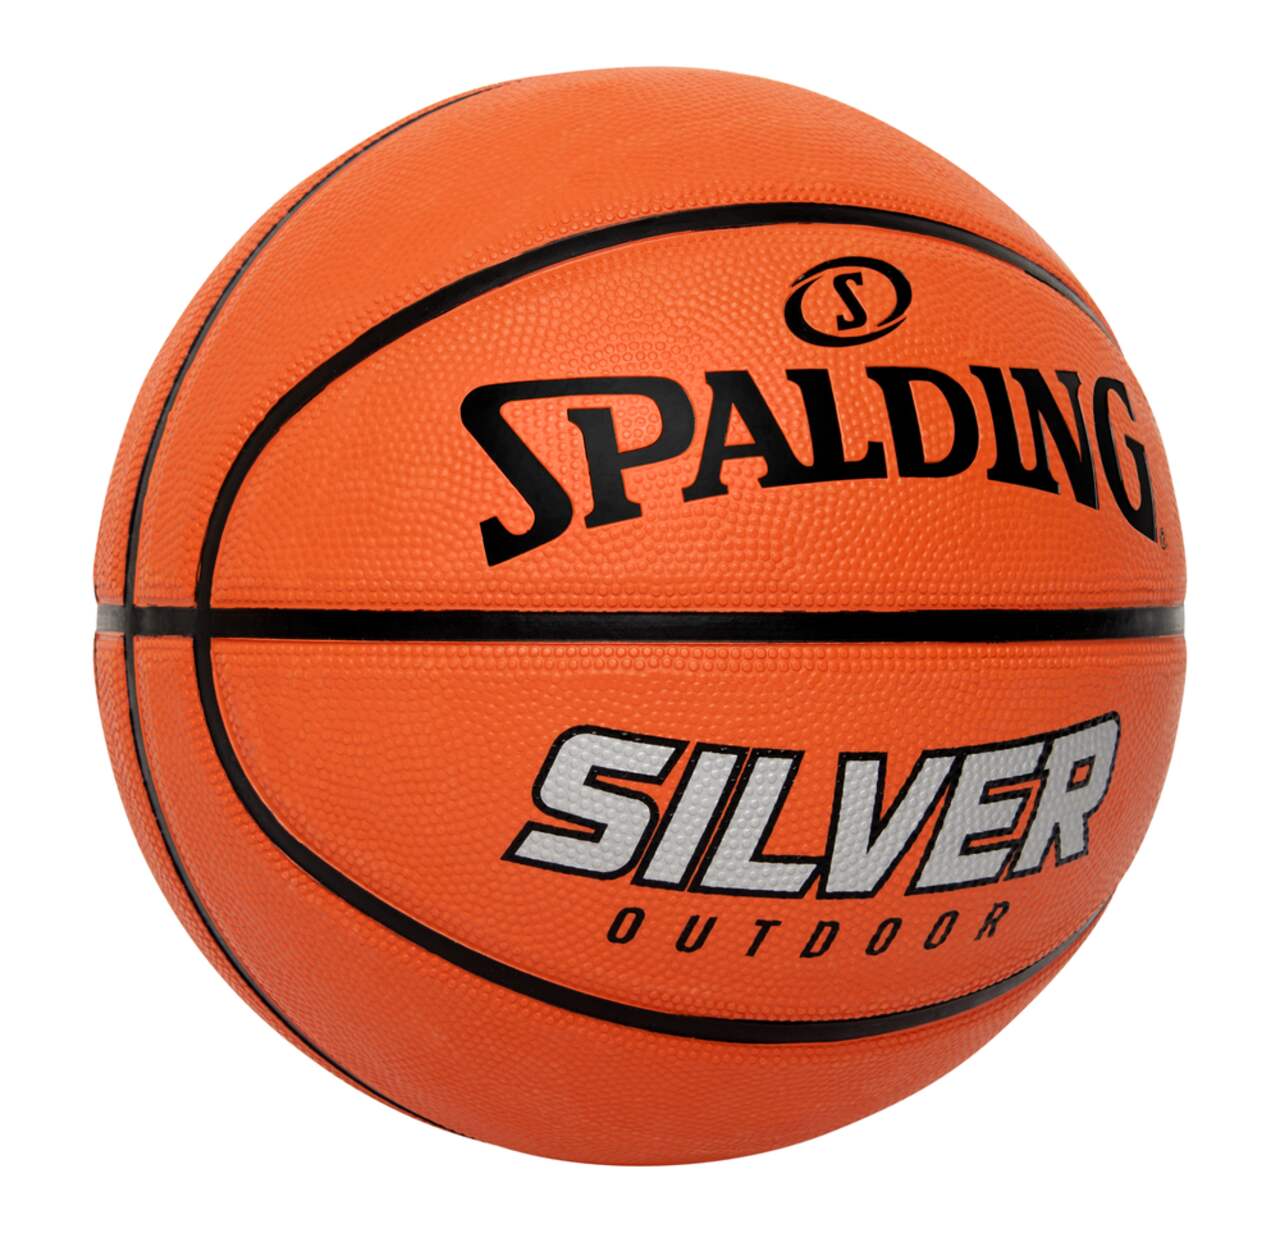 Spalding Silver Outdoor Rubber Basketball, Official Size 7 (29.5-in)